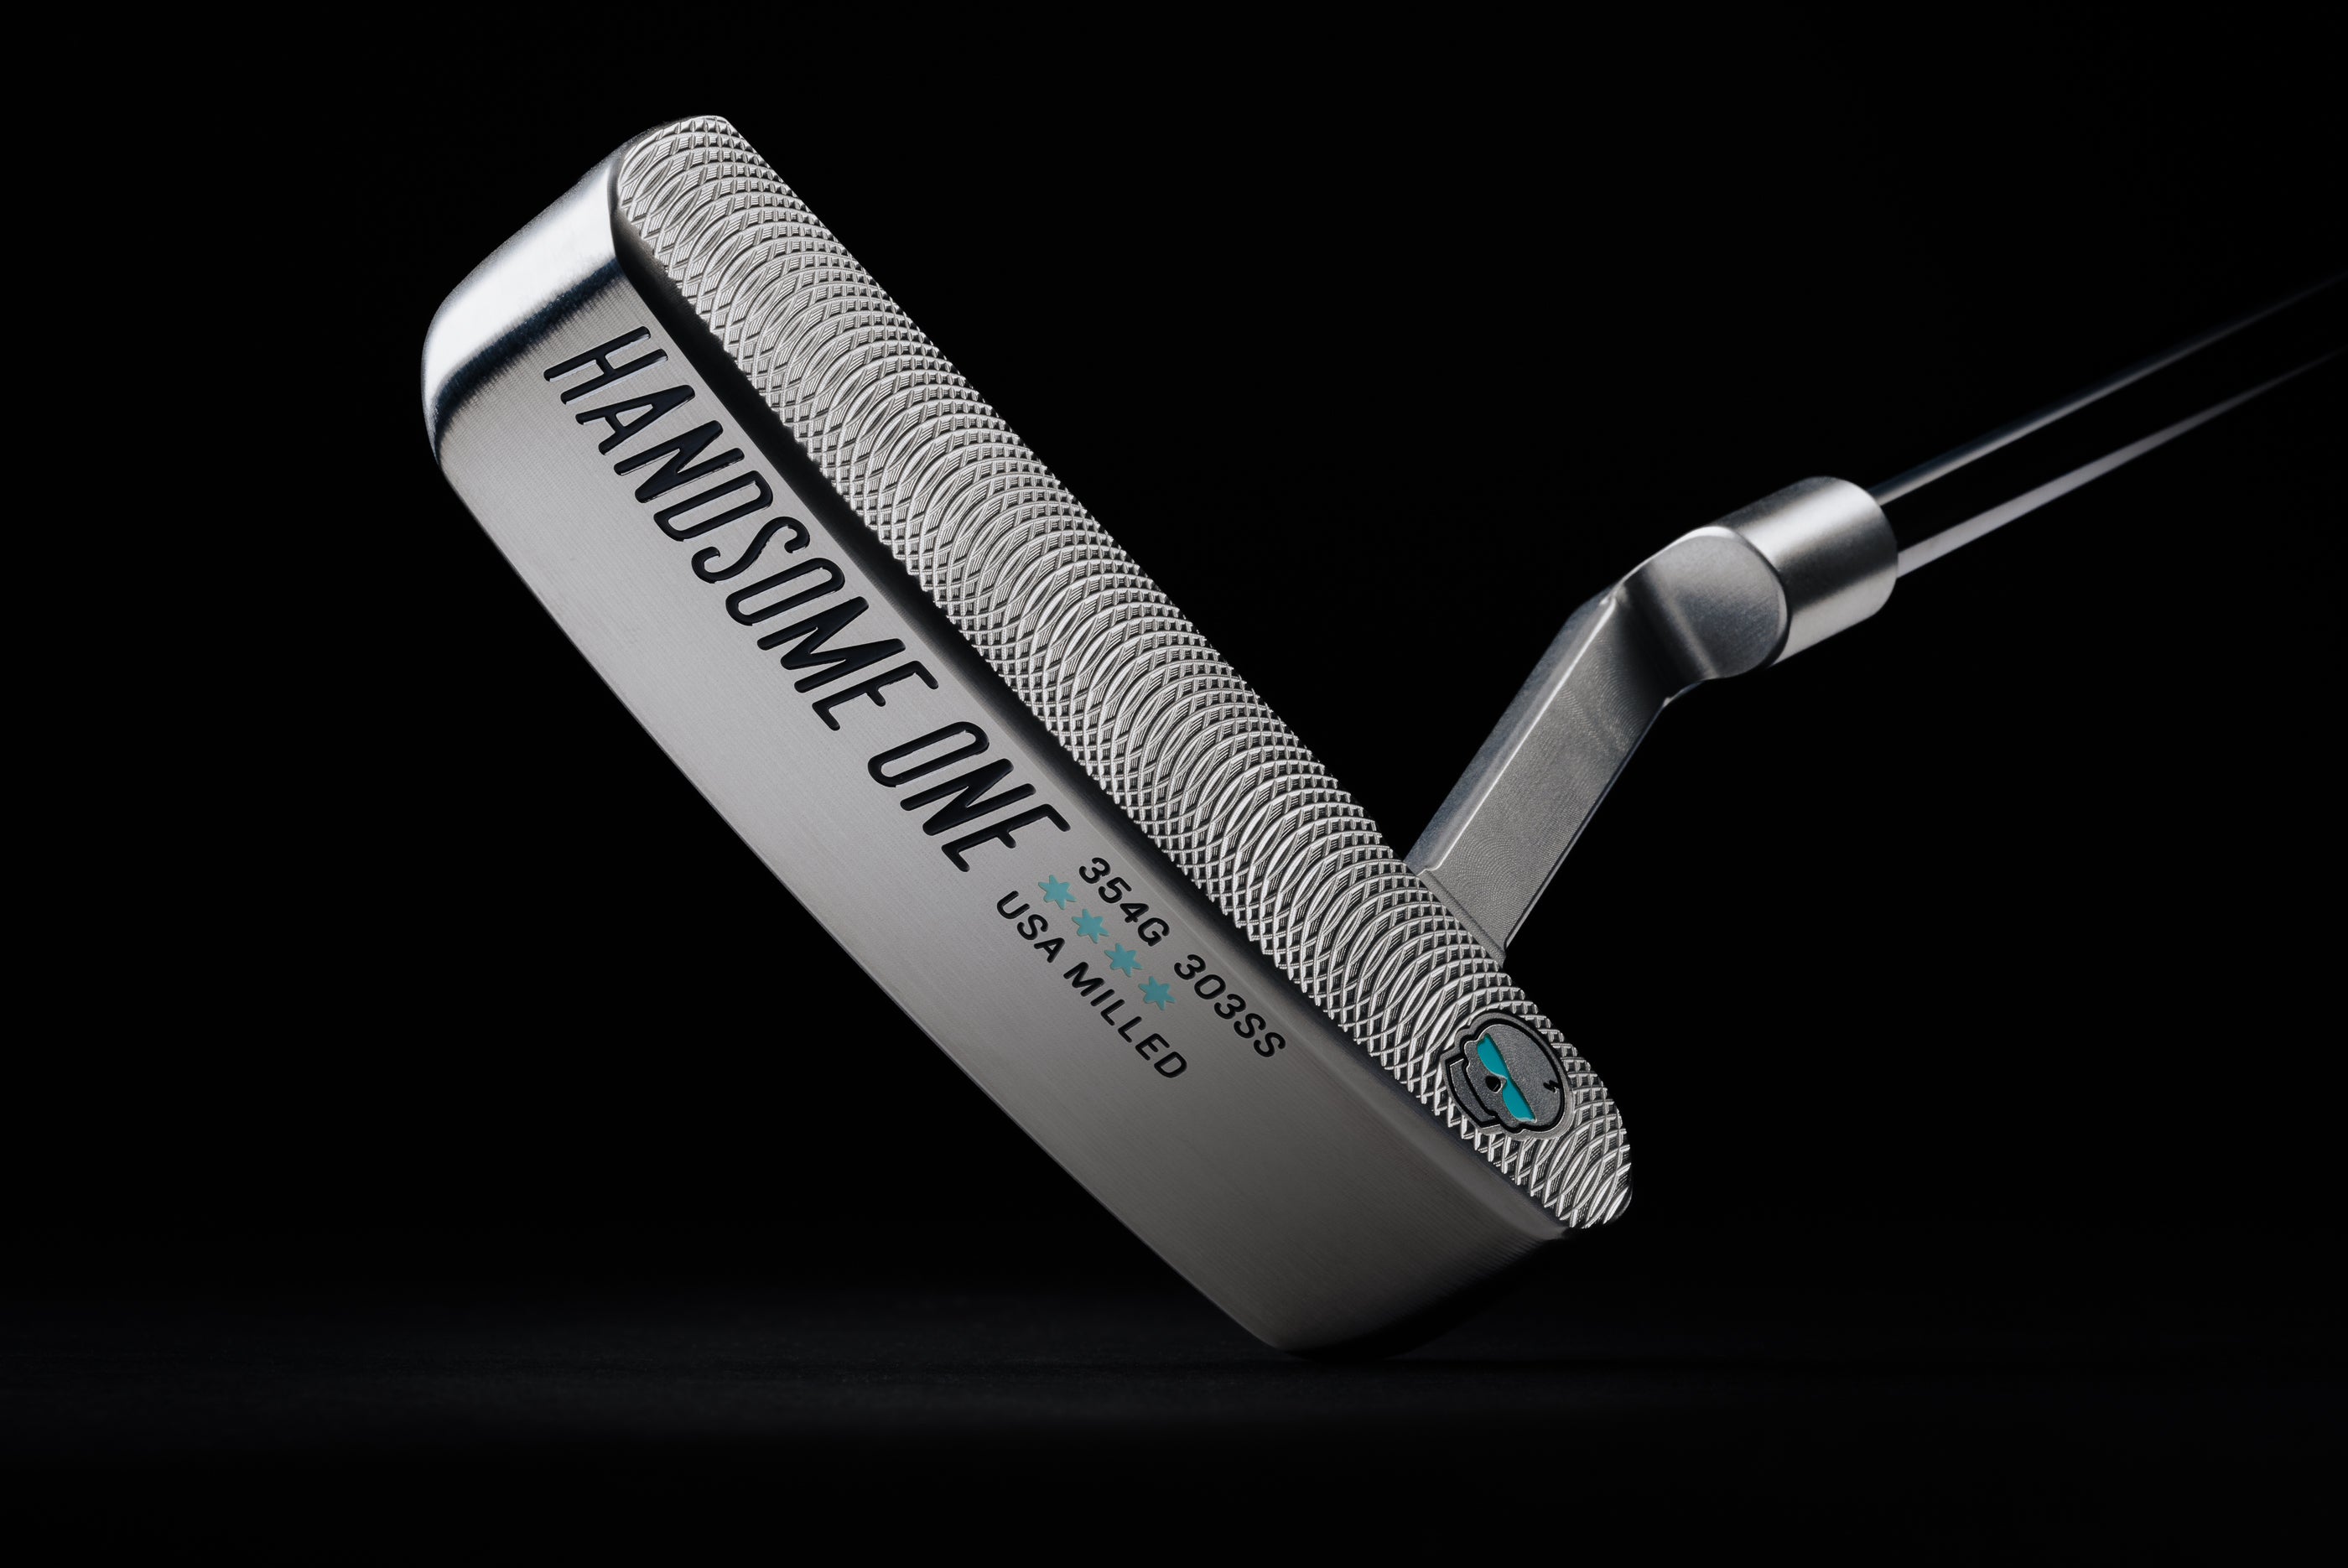 Swag Golf Handsome One blade putter golf club. This putter model continues the tradition of having a responsive sound and feel at impact.